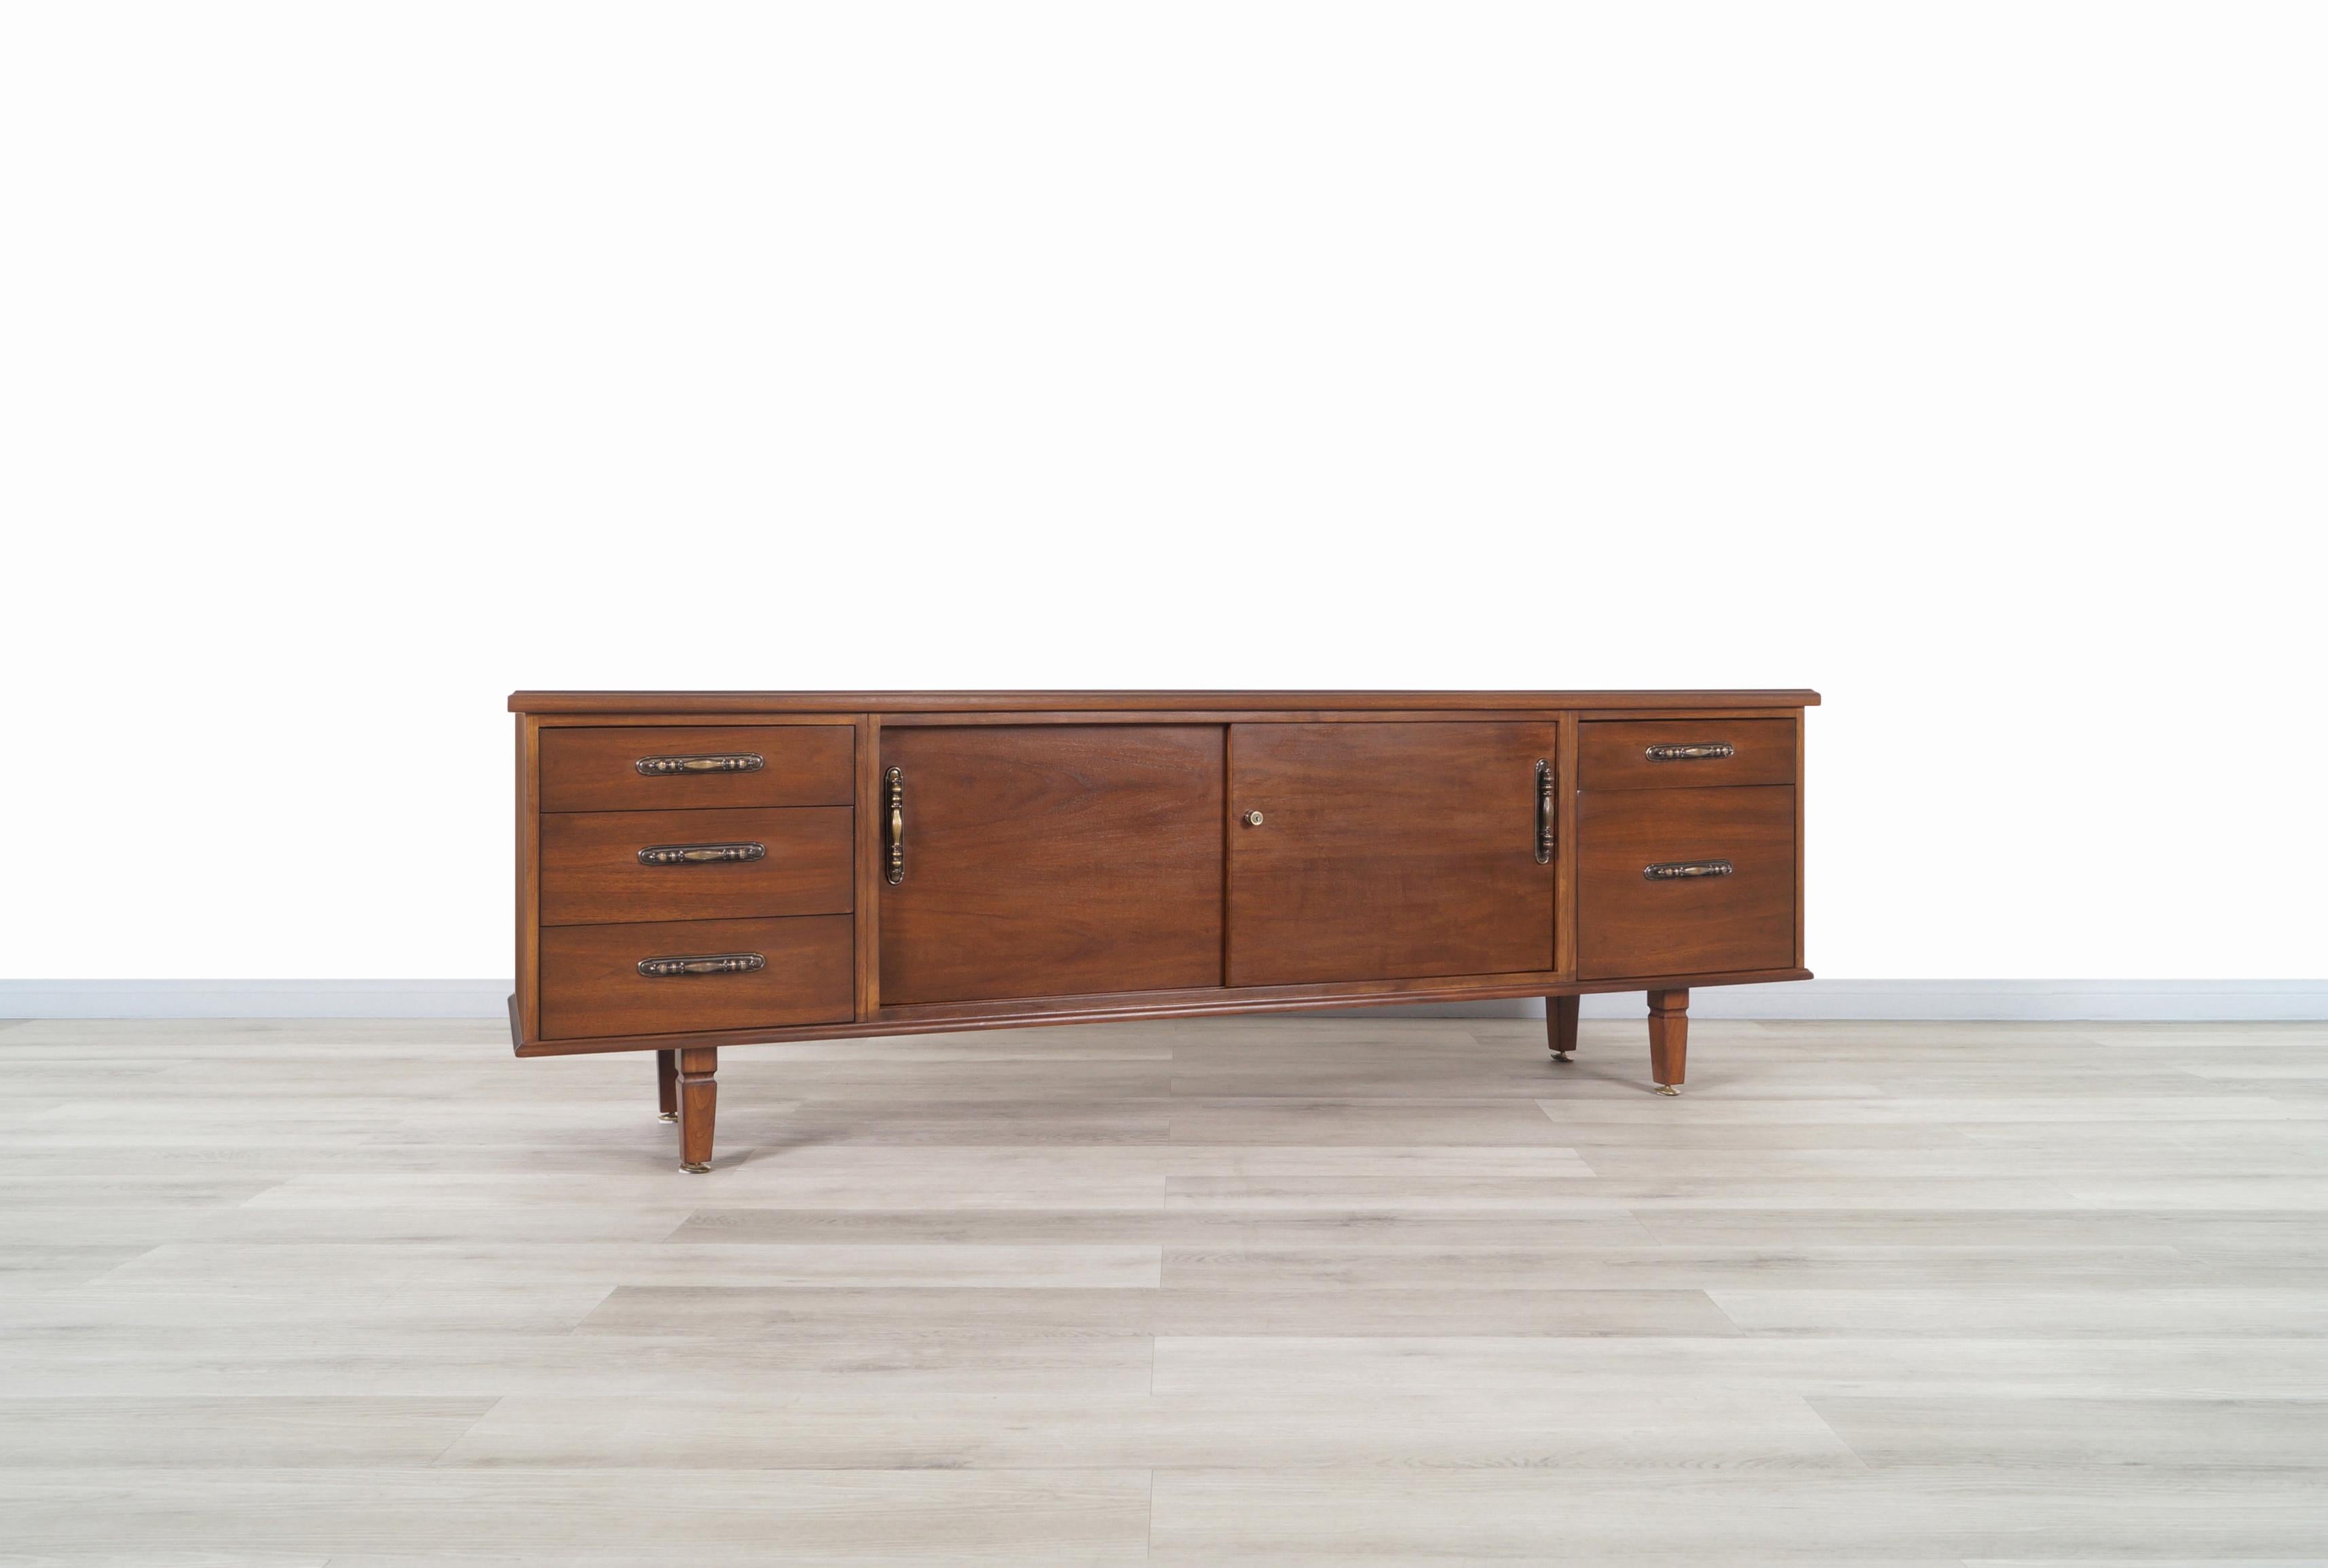 An elegant vintage walnut credenza designed by Maurice Bailey for Monteverdi Young in the United States, circa 1960s. This amazing credenza has two sliding doors with adjustable / removable shelves in addition to five drawers with side rails, which